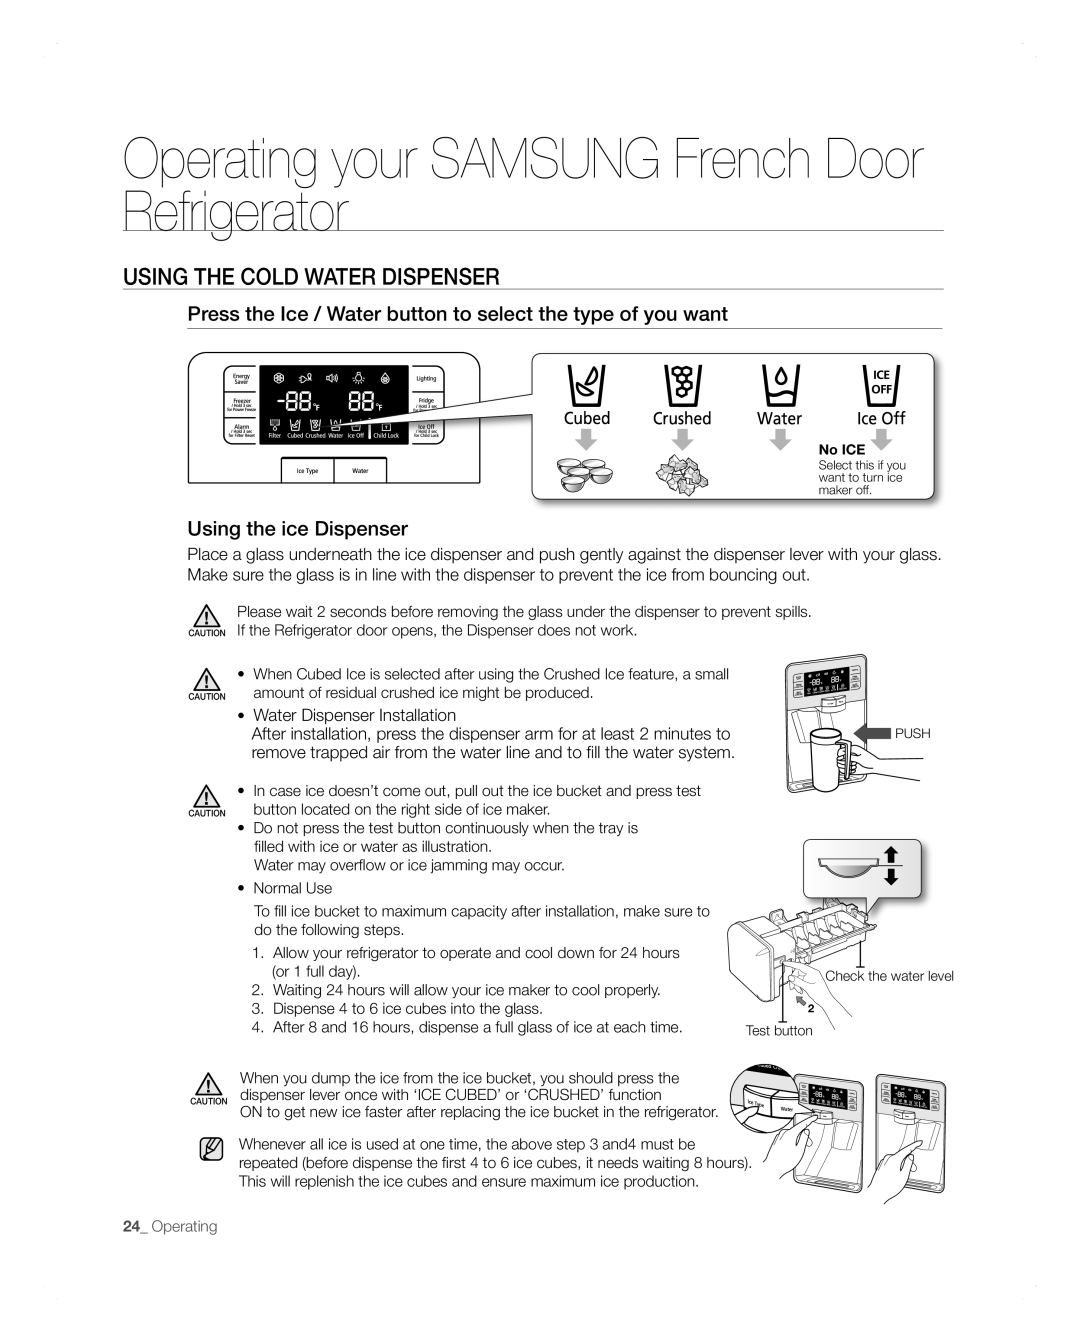 Samsung RFG297AARS user manual Using The Cold Water Dispenser, Operating your SAMSUNG French Door Refrigerator 